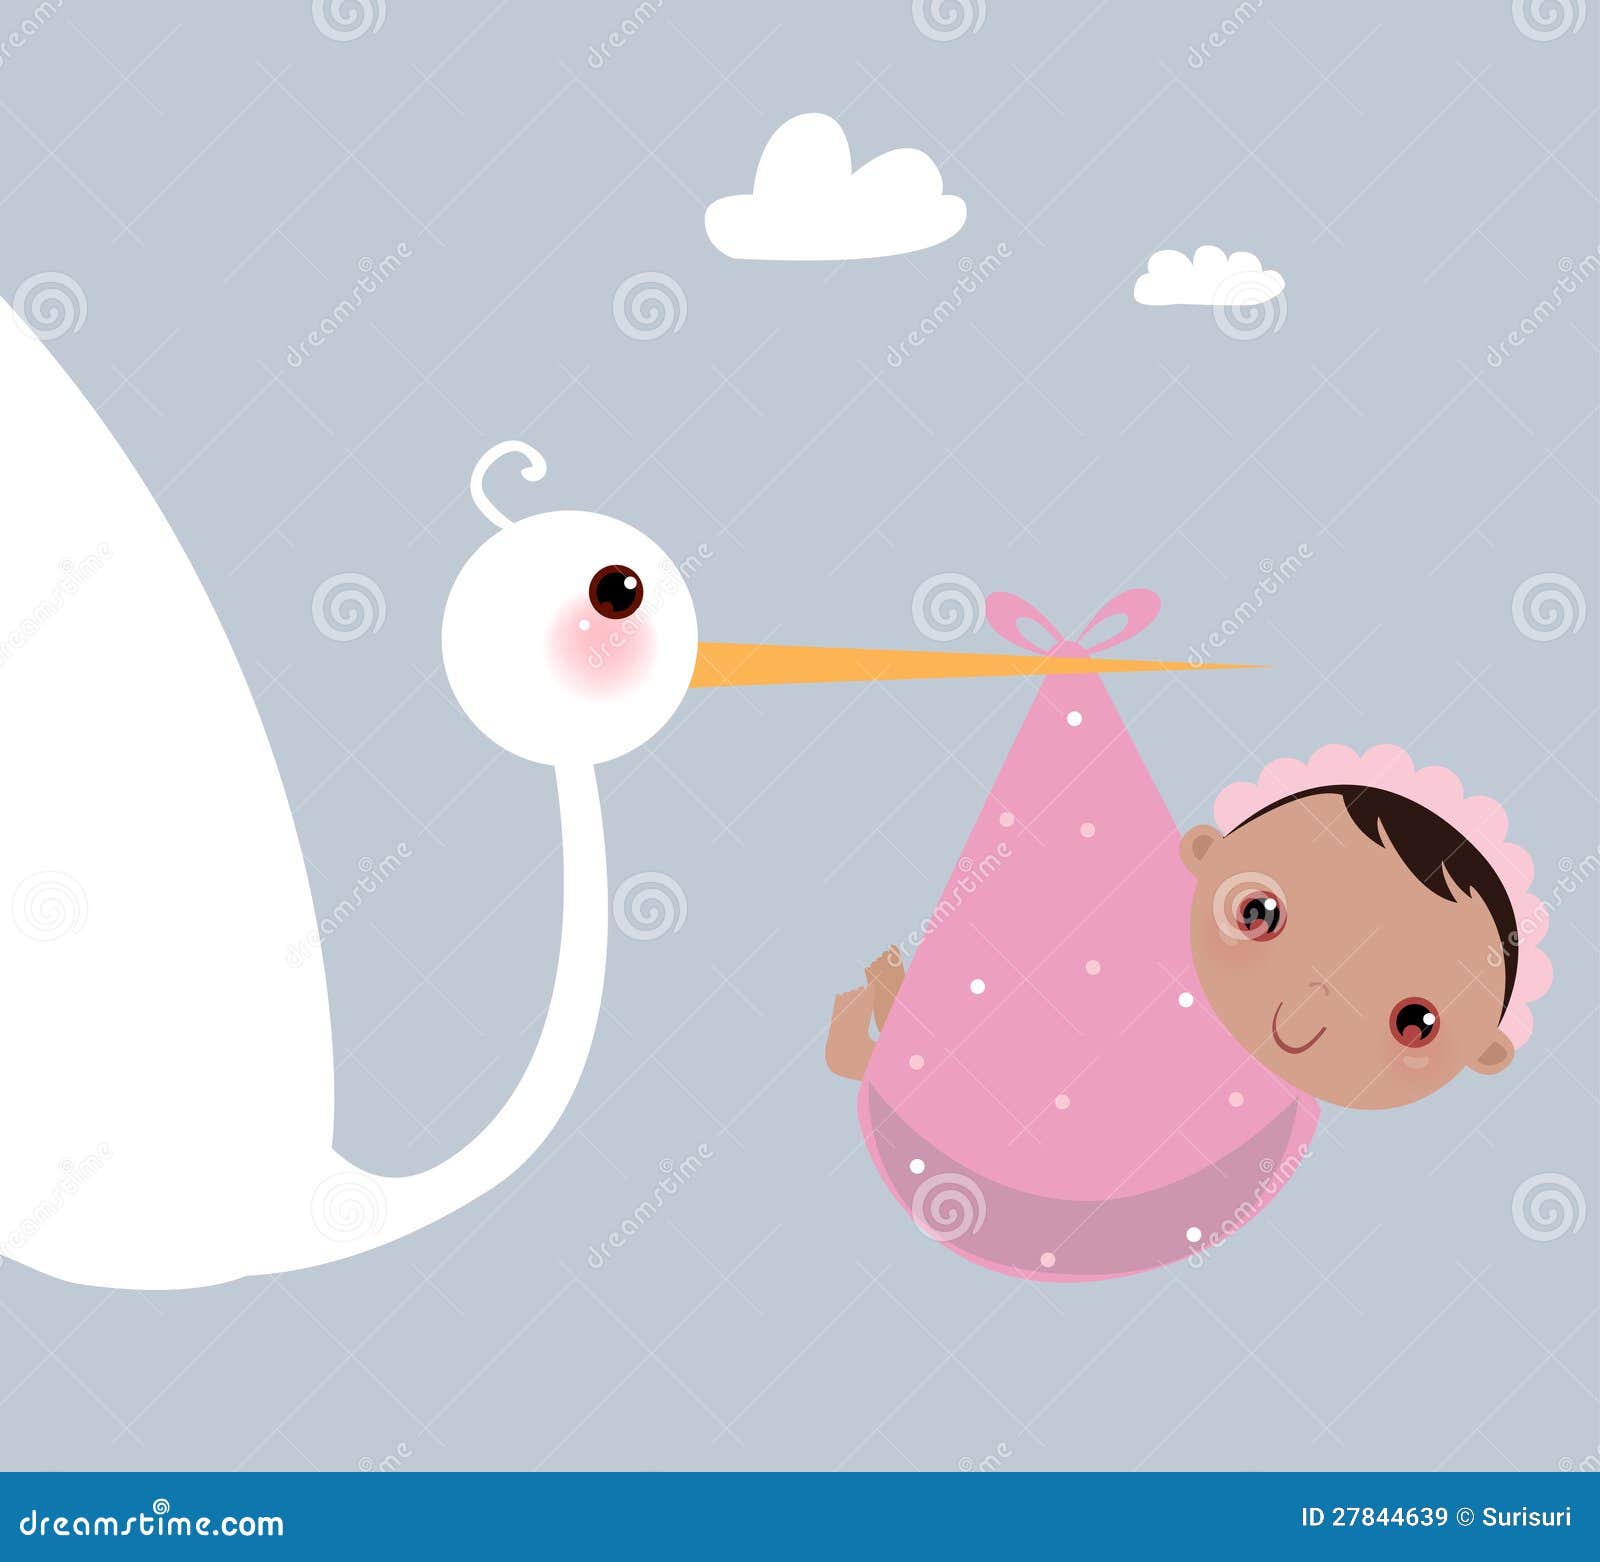 clipart image stork holding a baby - photo #23